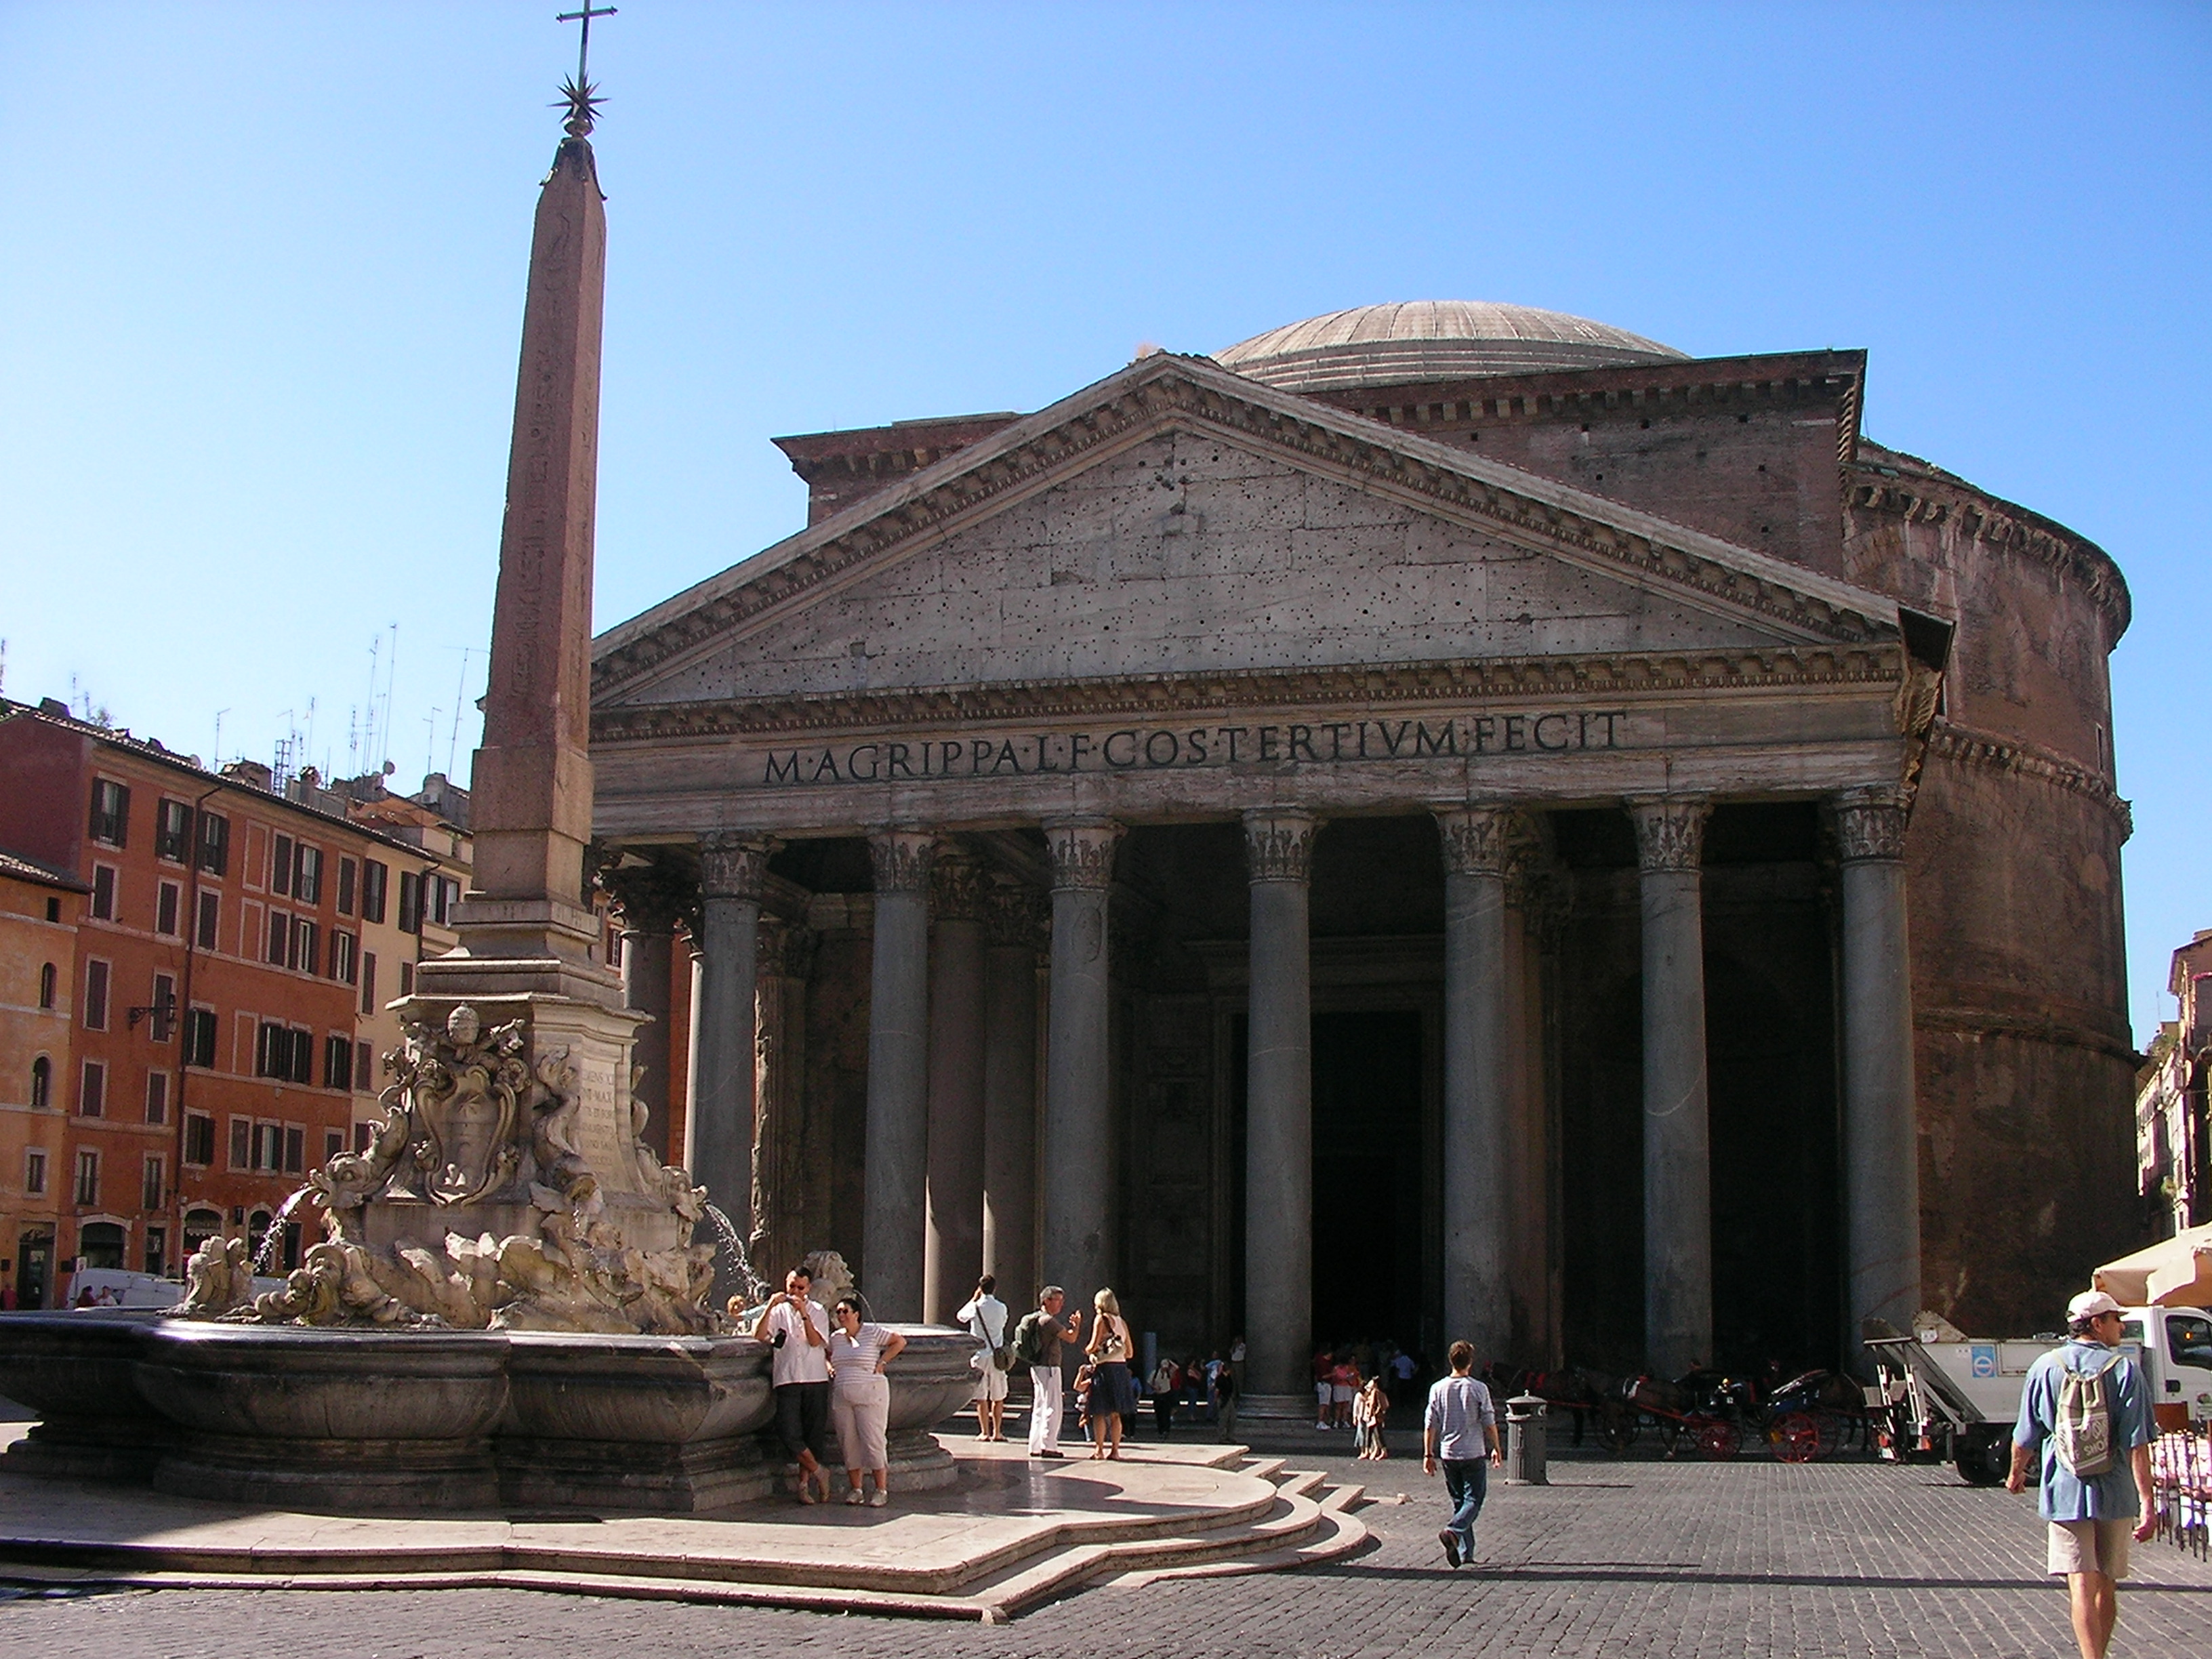 Are tourist attractions in rome open on sunday